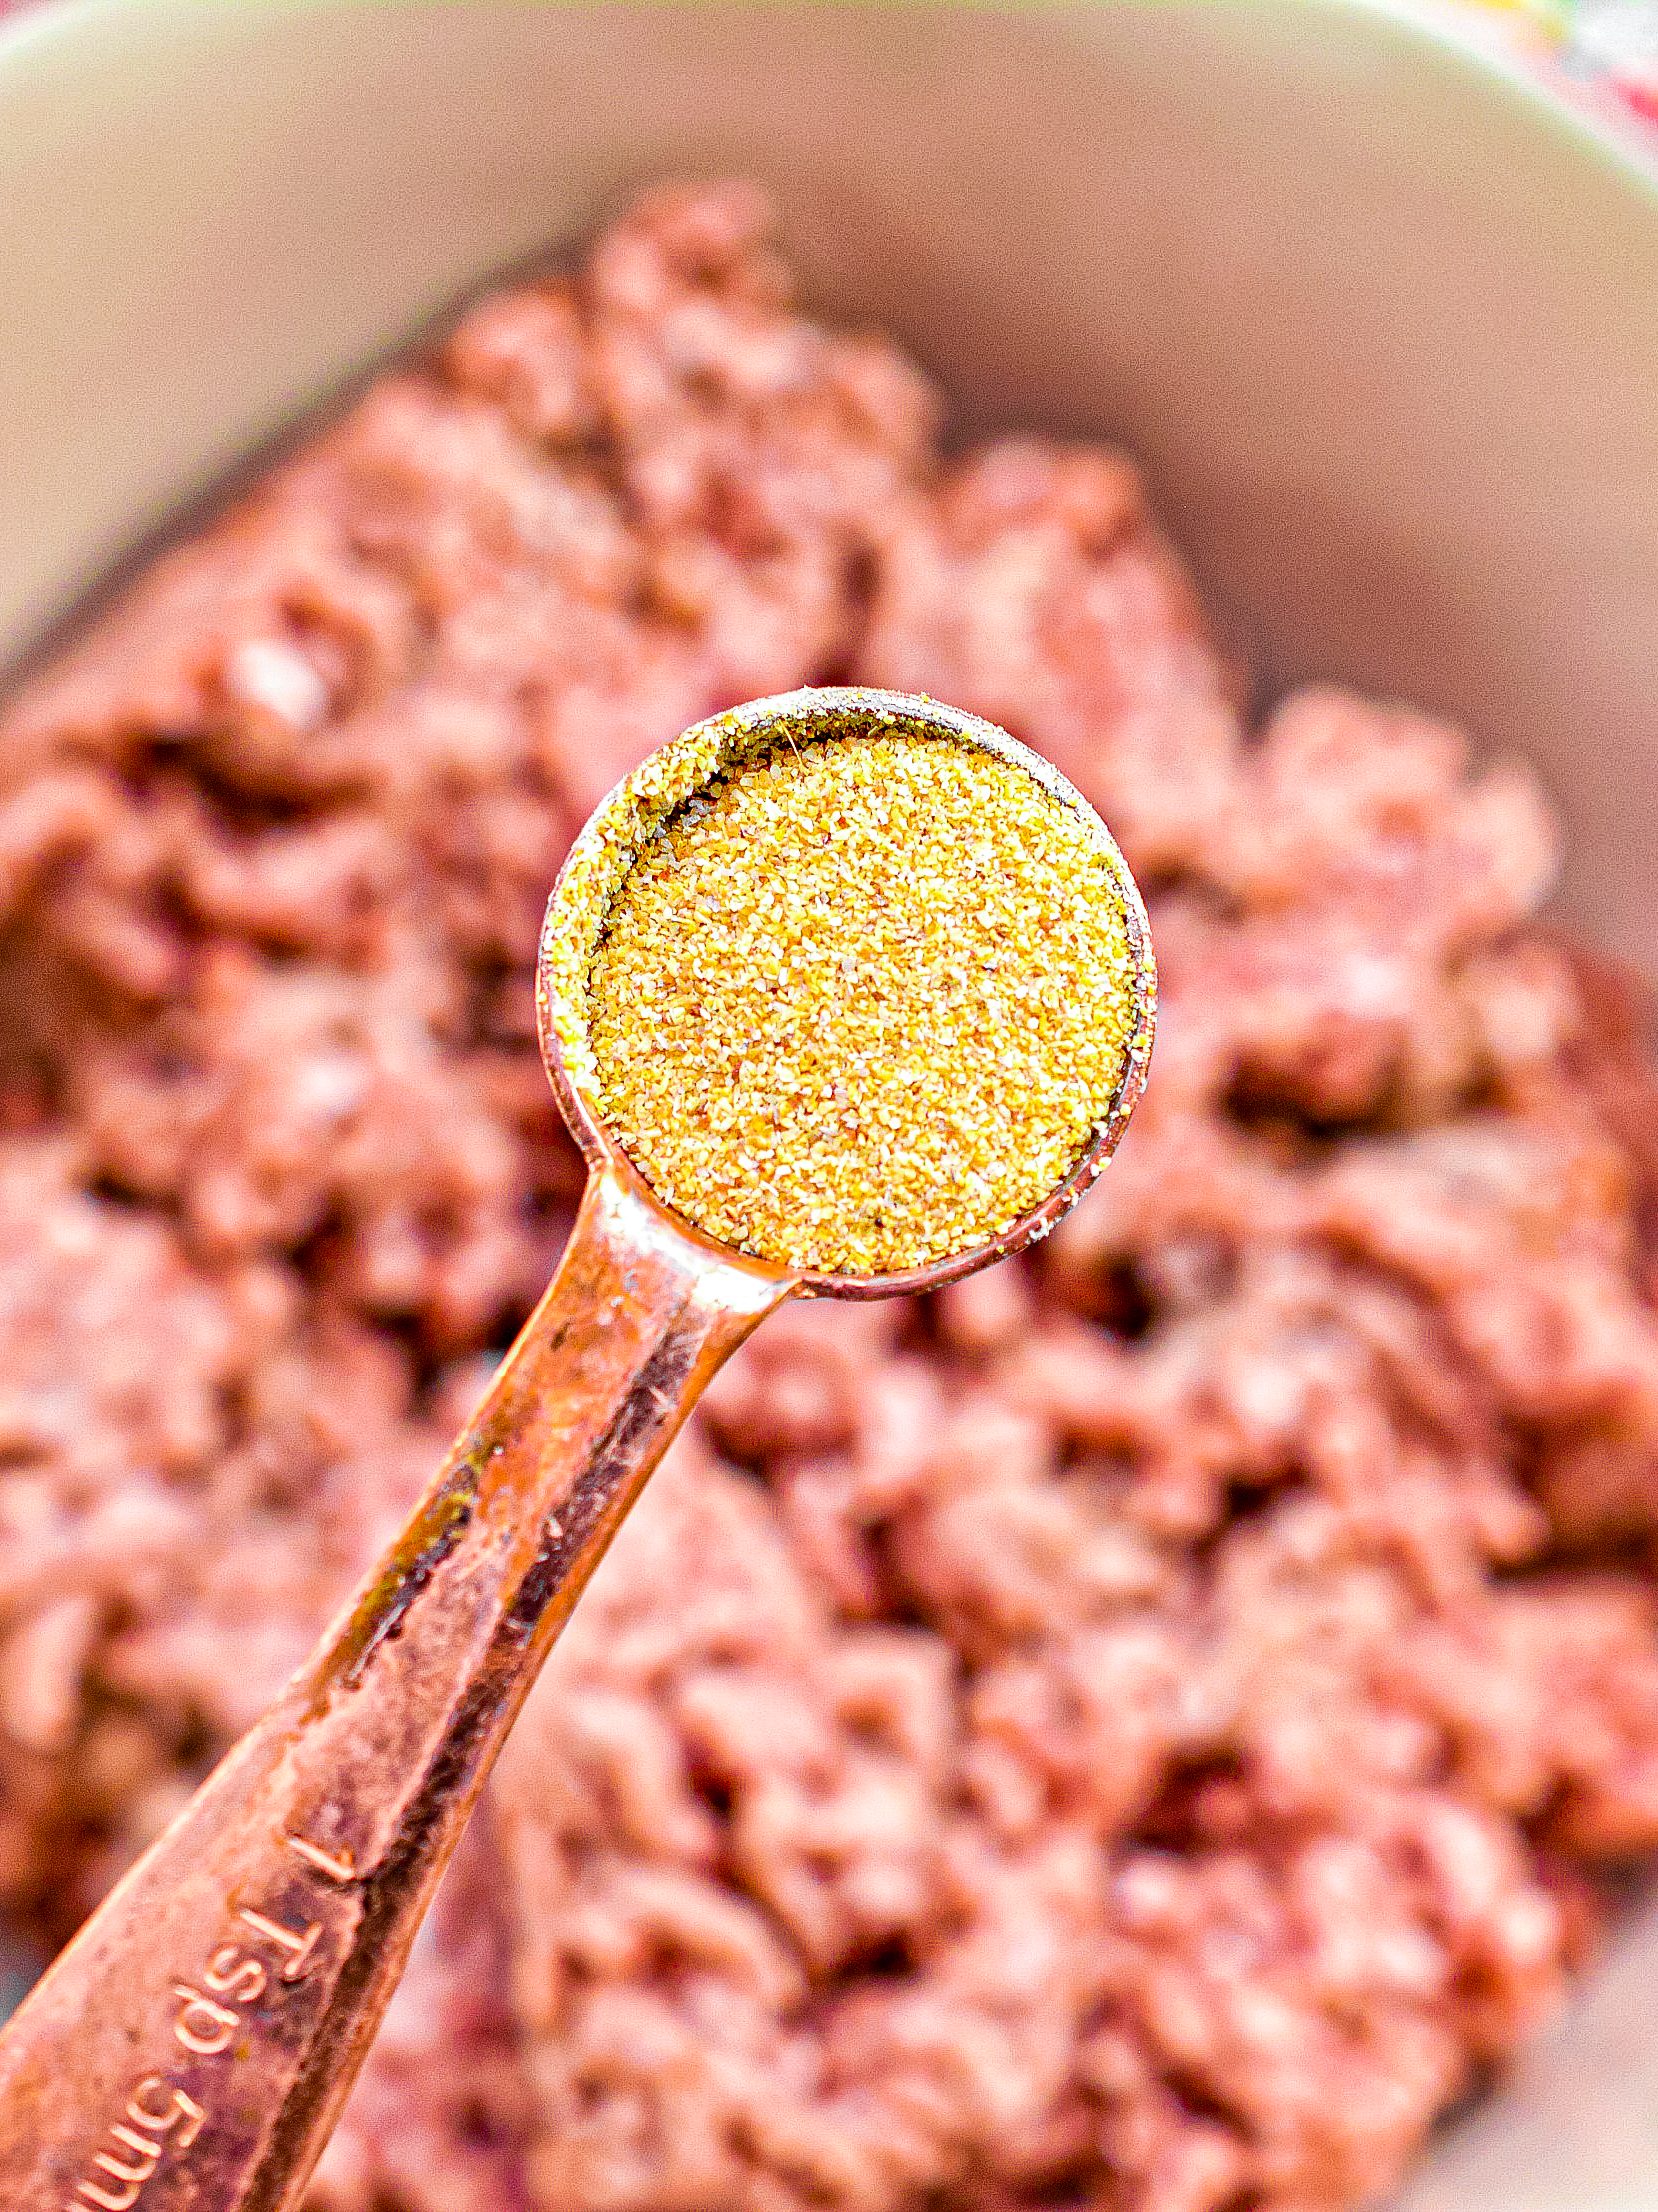 Place 1 ½ lb. of ground beef into a mixing bowl, season it with ½ tsp of garlic powder, salt, and pepper, and mix with your hands to combine well.